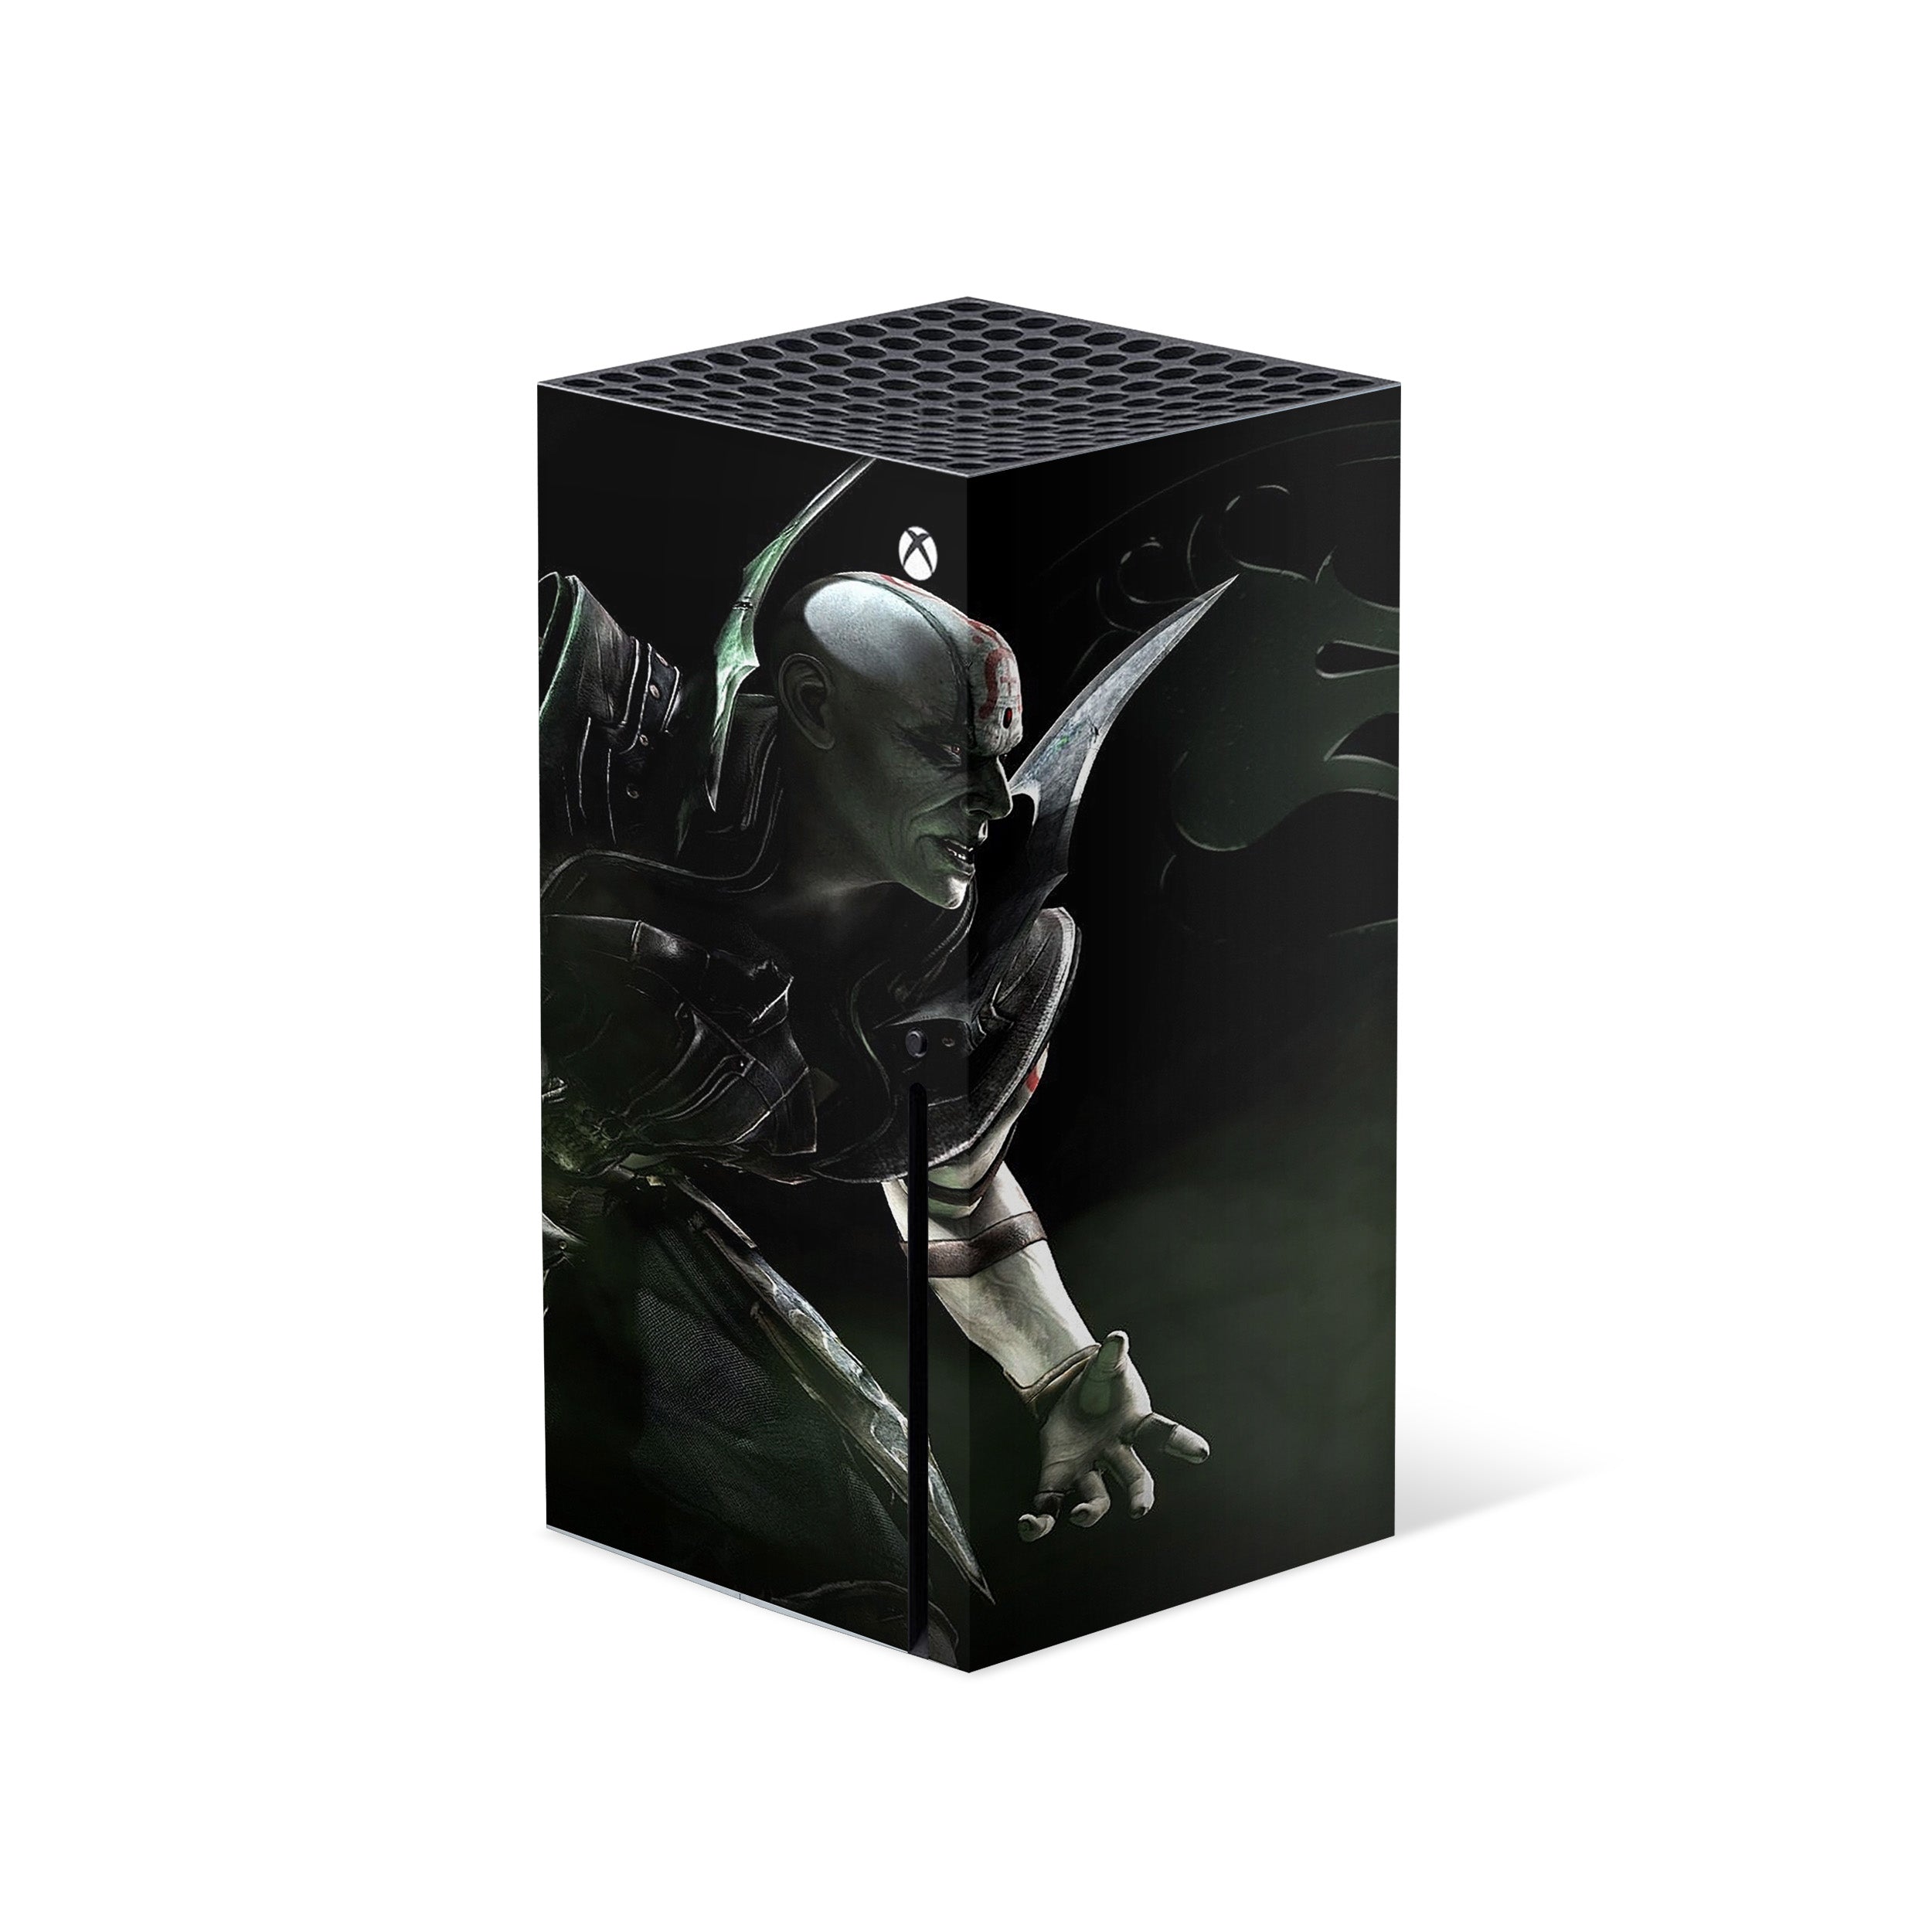 A video game skin featuring a Mortal Kombat Quan Chi design for the Xbox Series X.